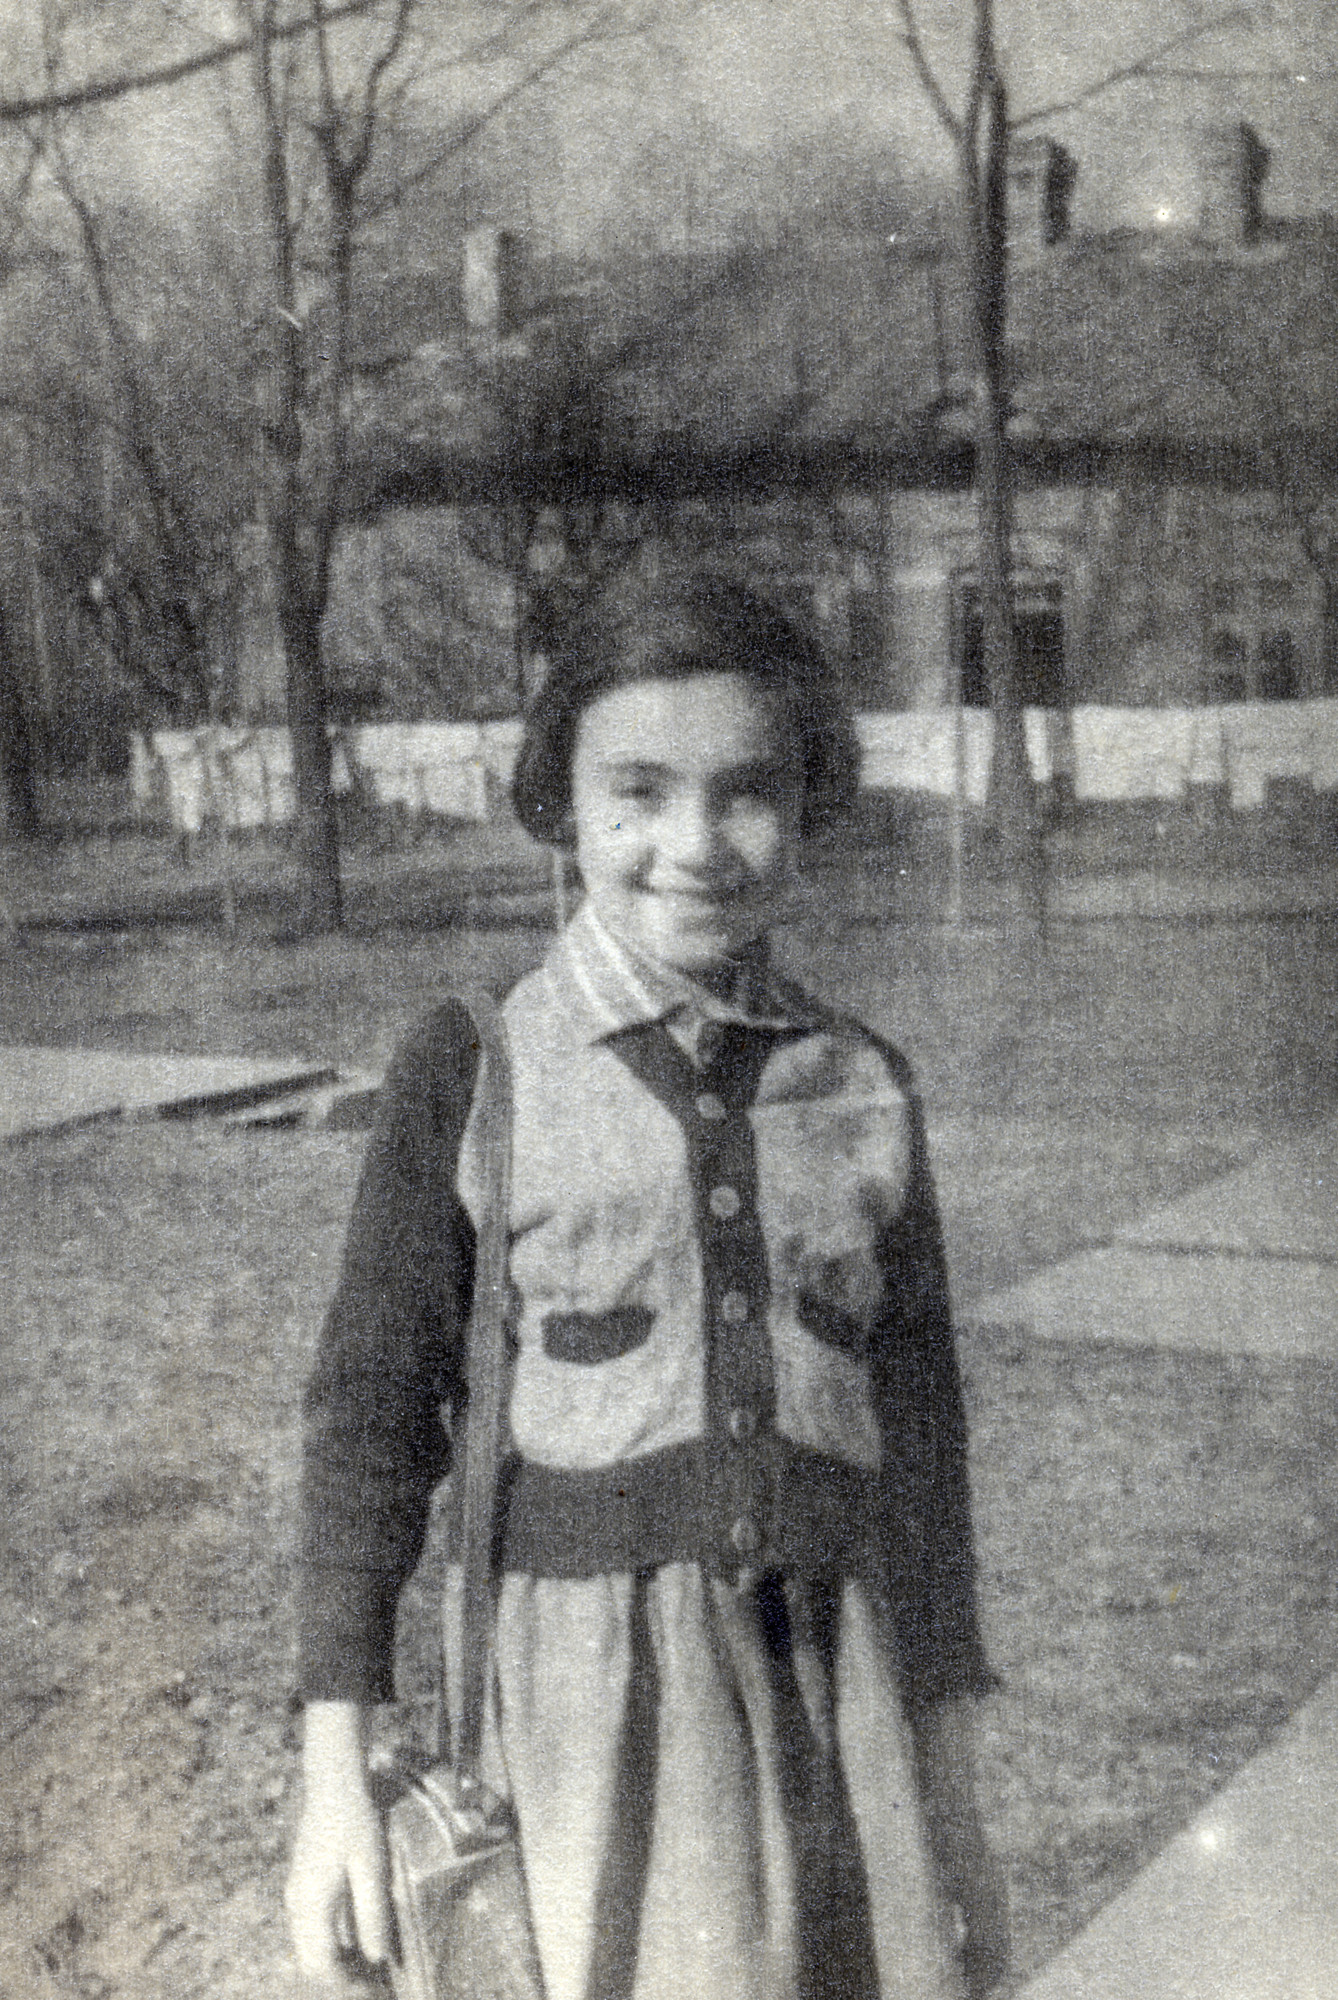 Leah Alterman stands outside an orphanage in Warsaw shortly after the end of the war.